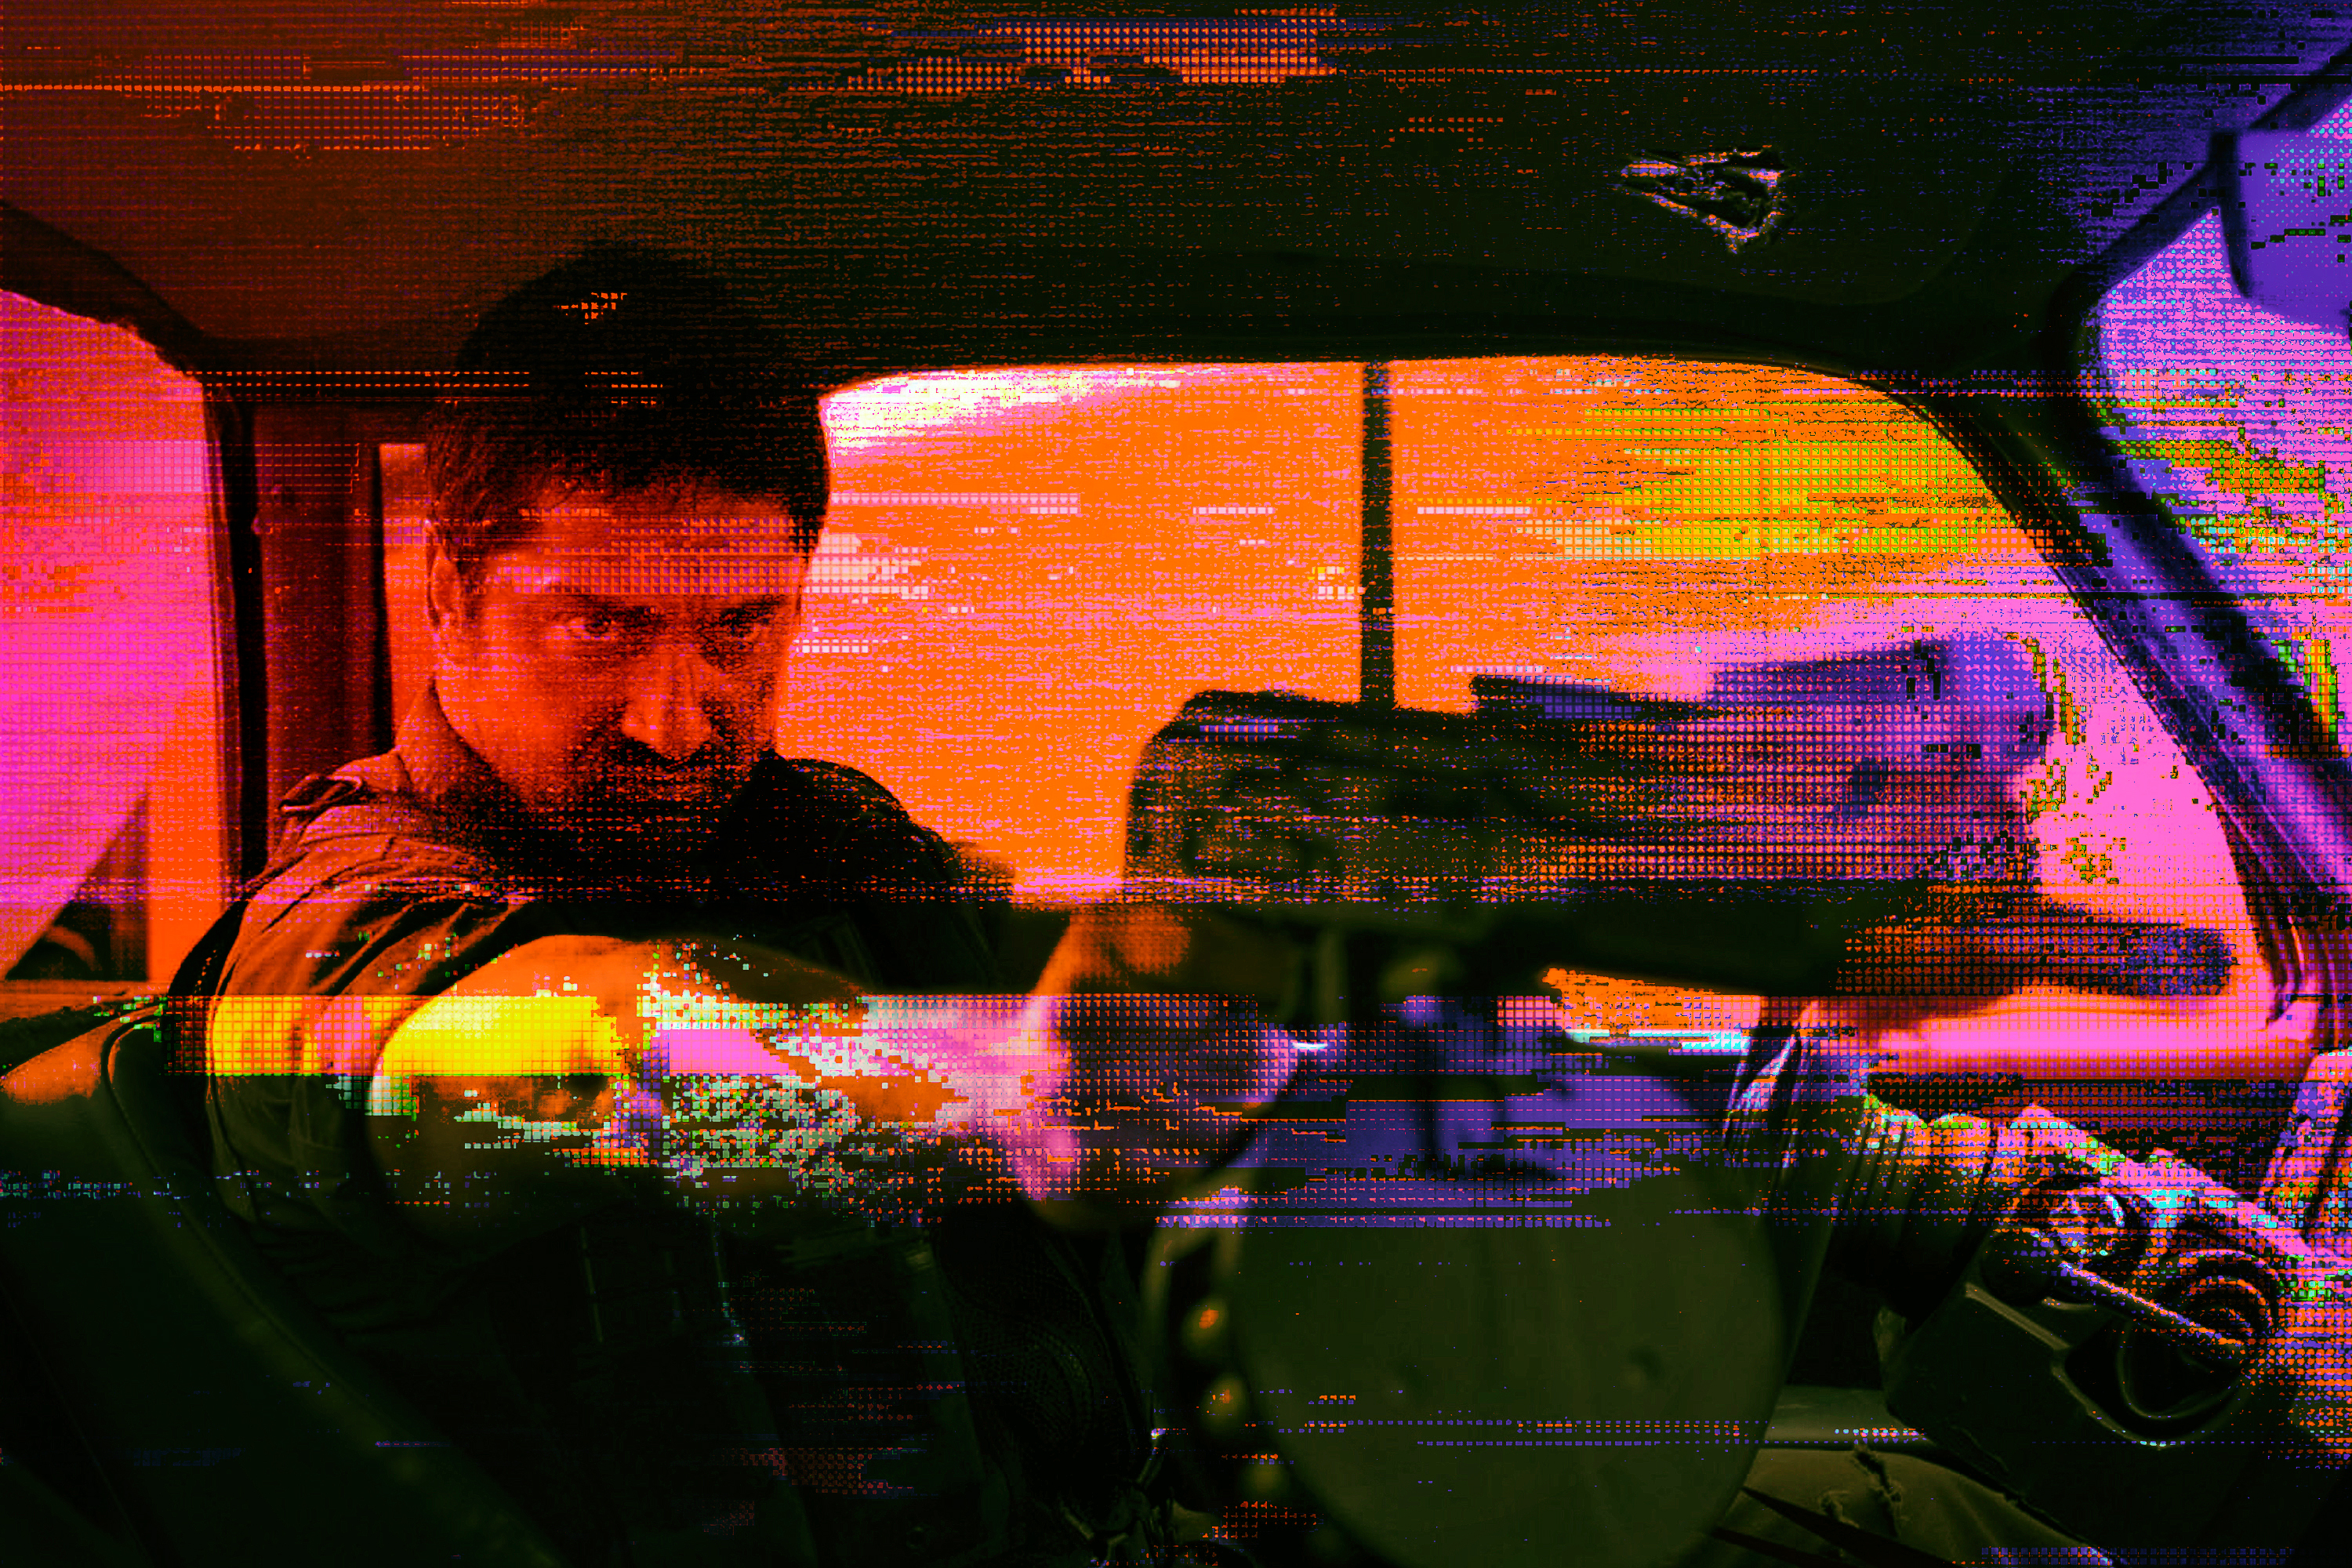 Glitchy, brightly colored image of actor Gerard Butler pointing a large gun in Gamer